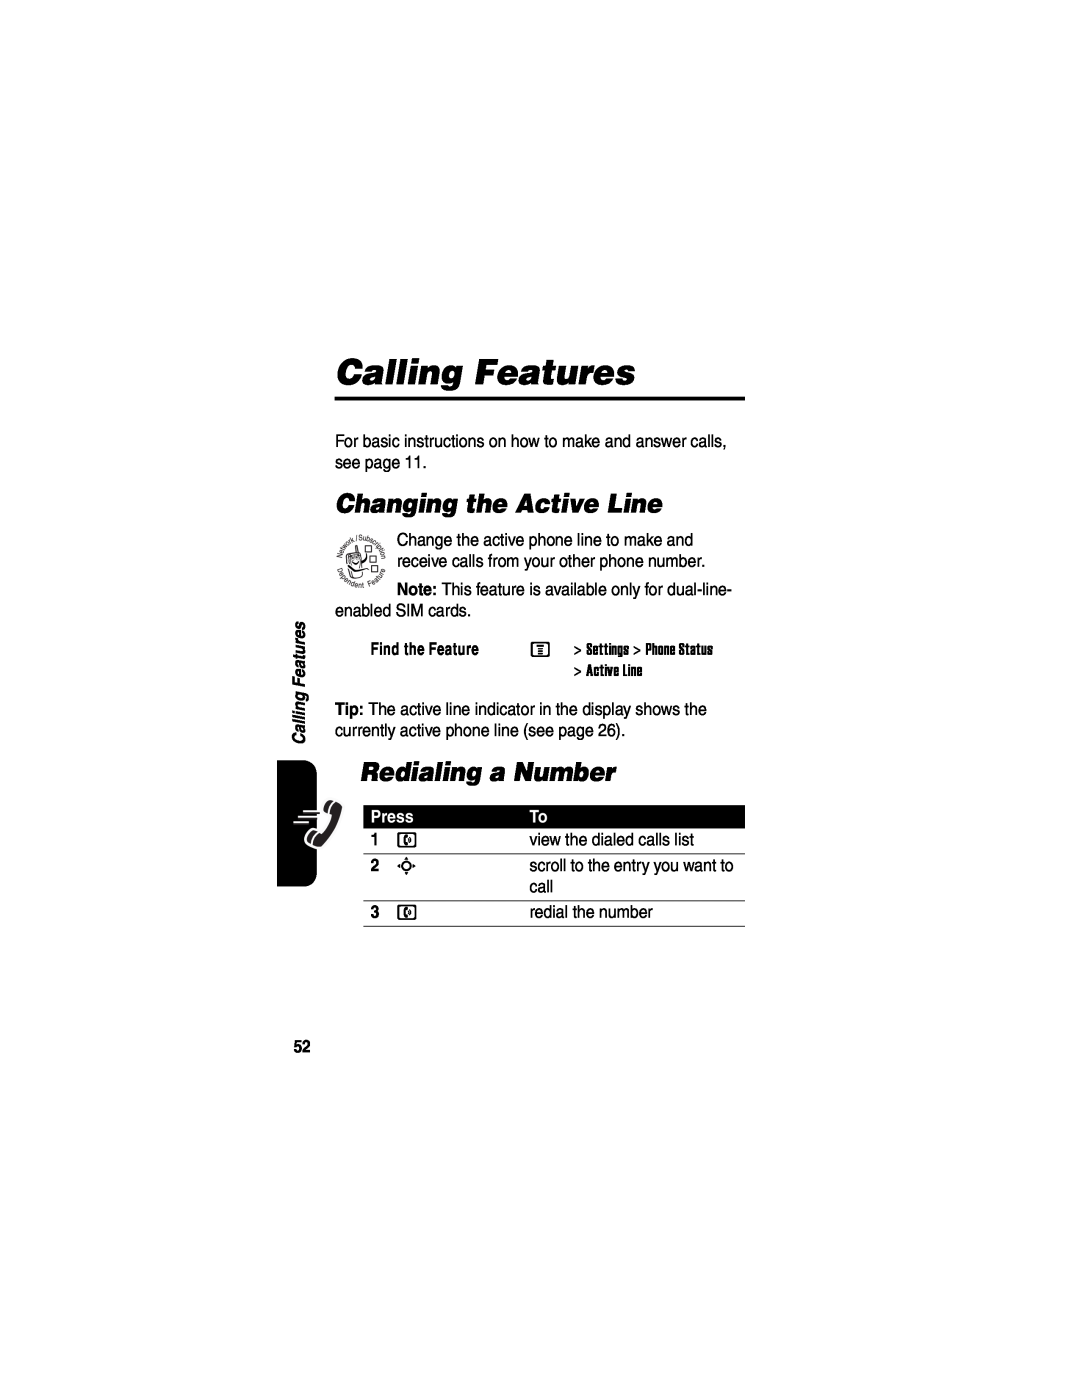 Motorola V551SLVATT manual Calling Features, Changing the Active Line, Redialing a Number, Press 